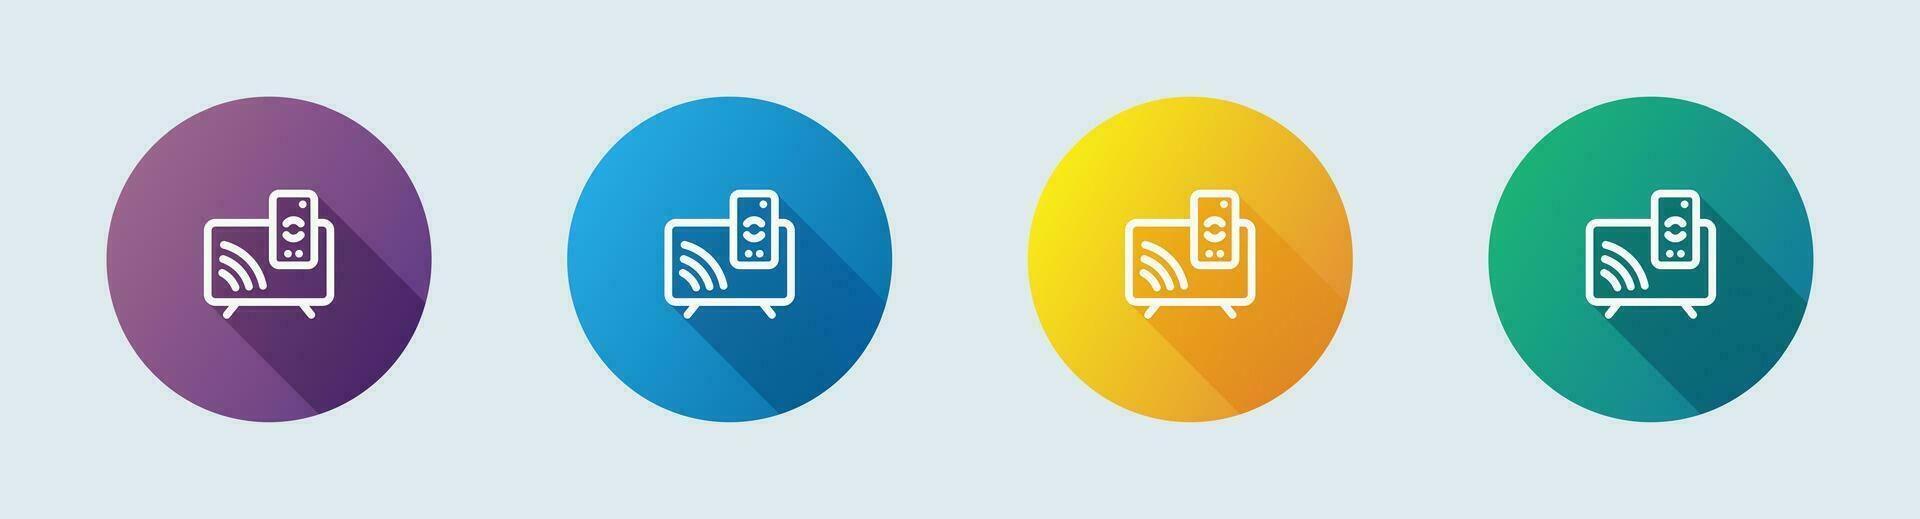 Smart television line icon in flat design style. Display signs vector illustration.